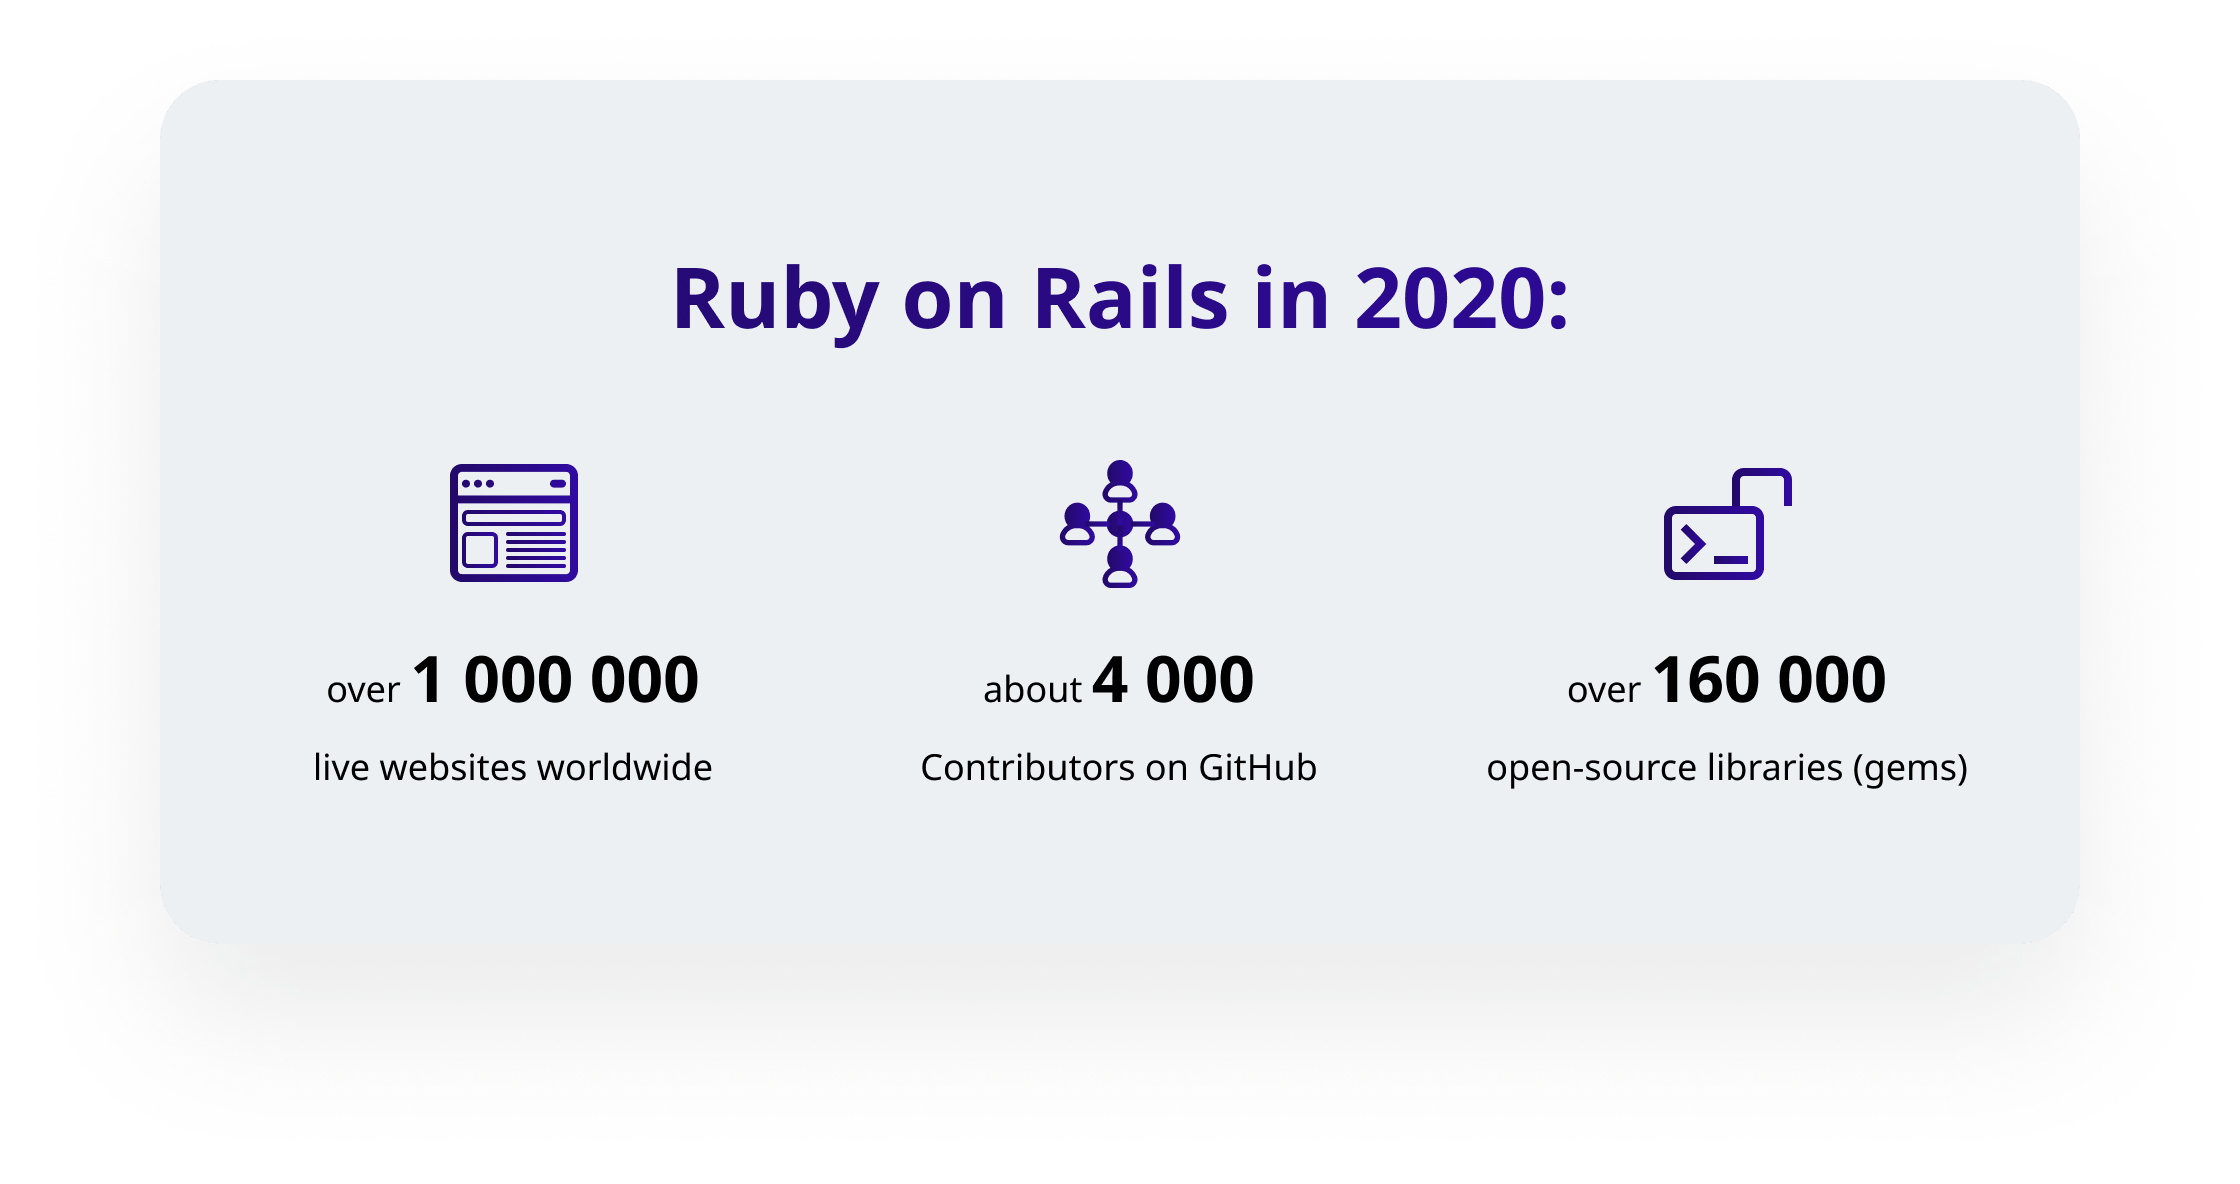 Is Ruby on Rails dying or already dead?